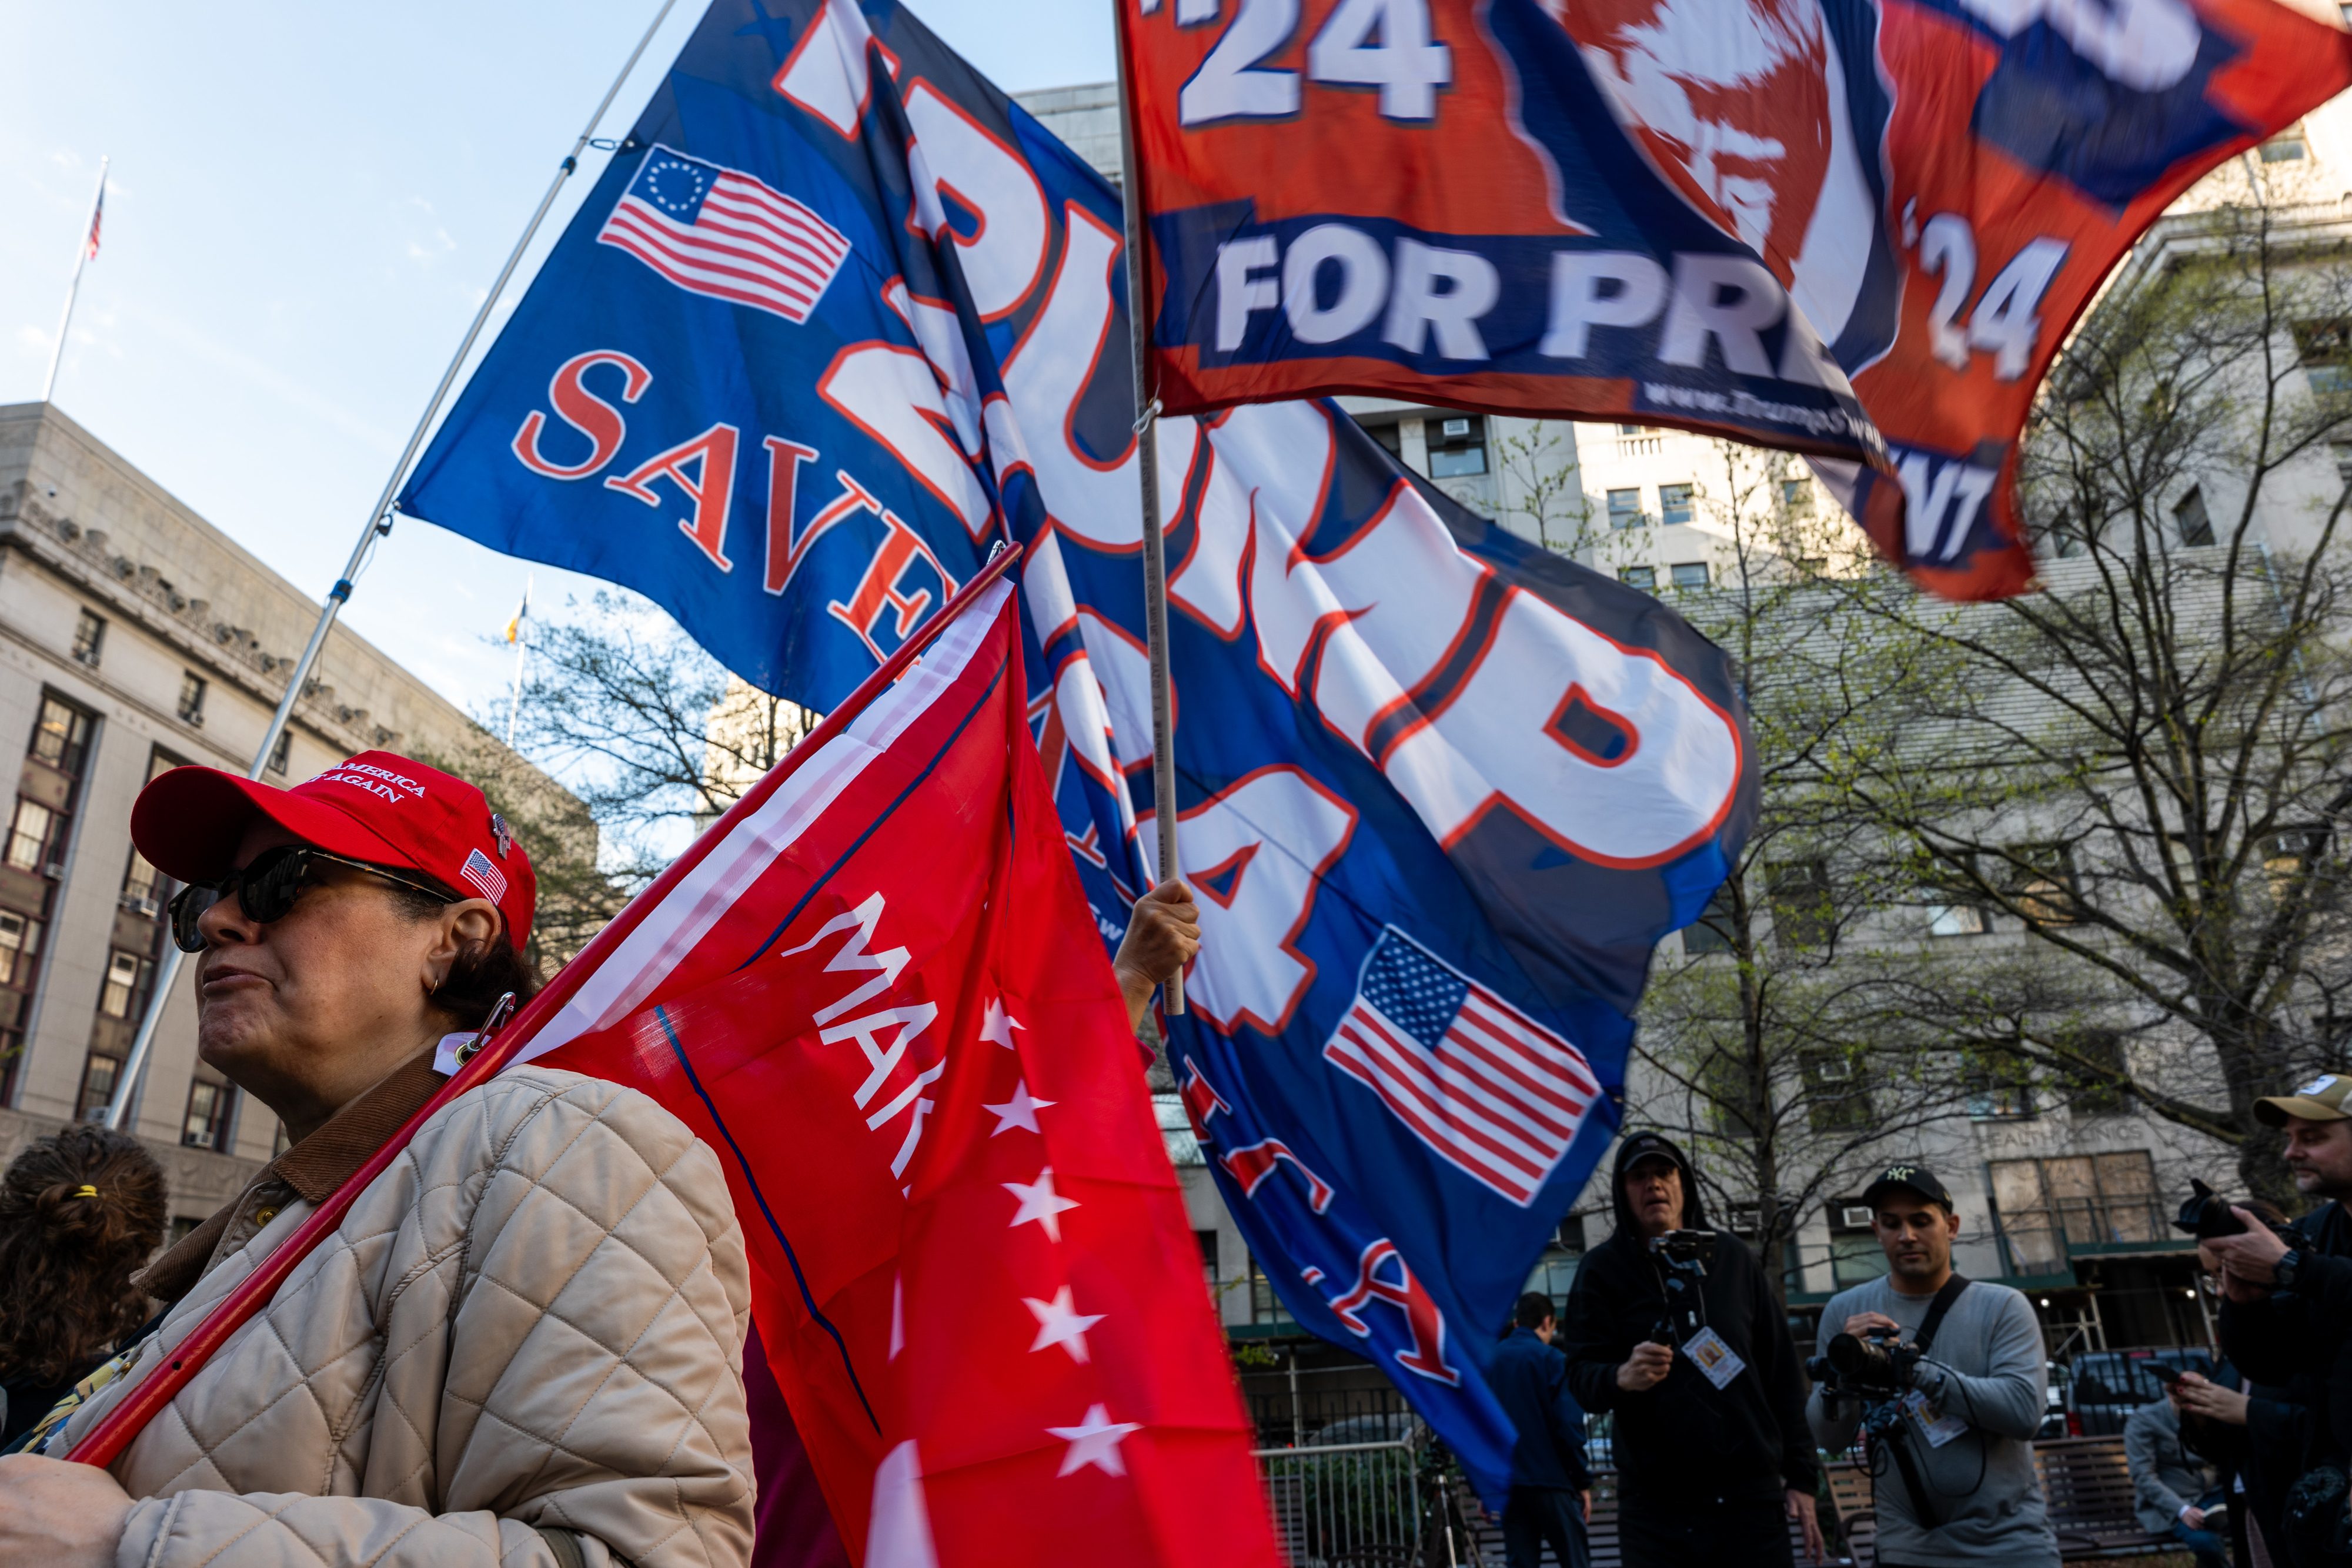 Supporters with &quot;Trump 2024&quot; flags at a rally, one wearing a red hat